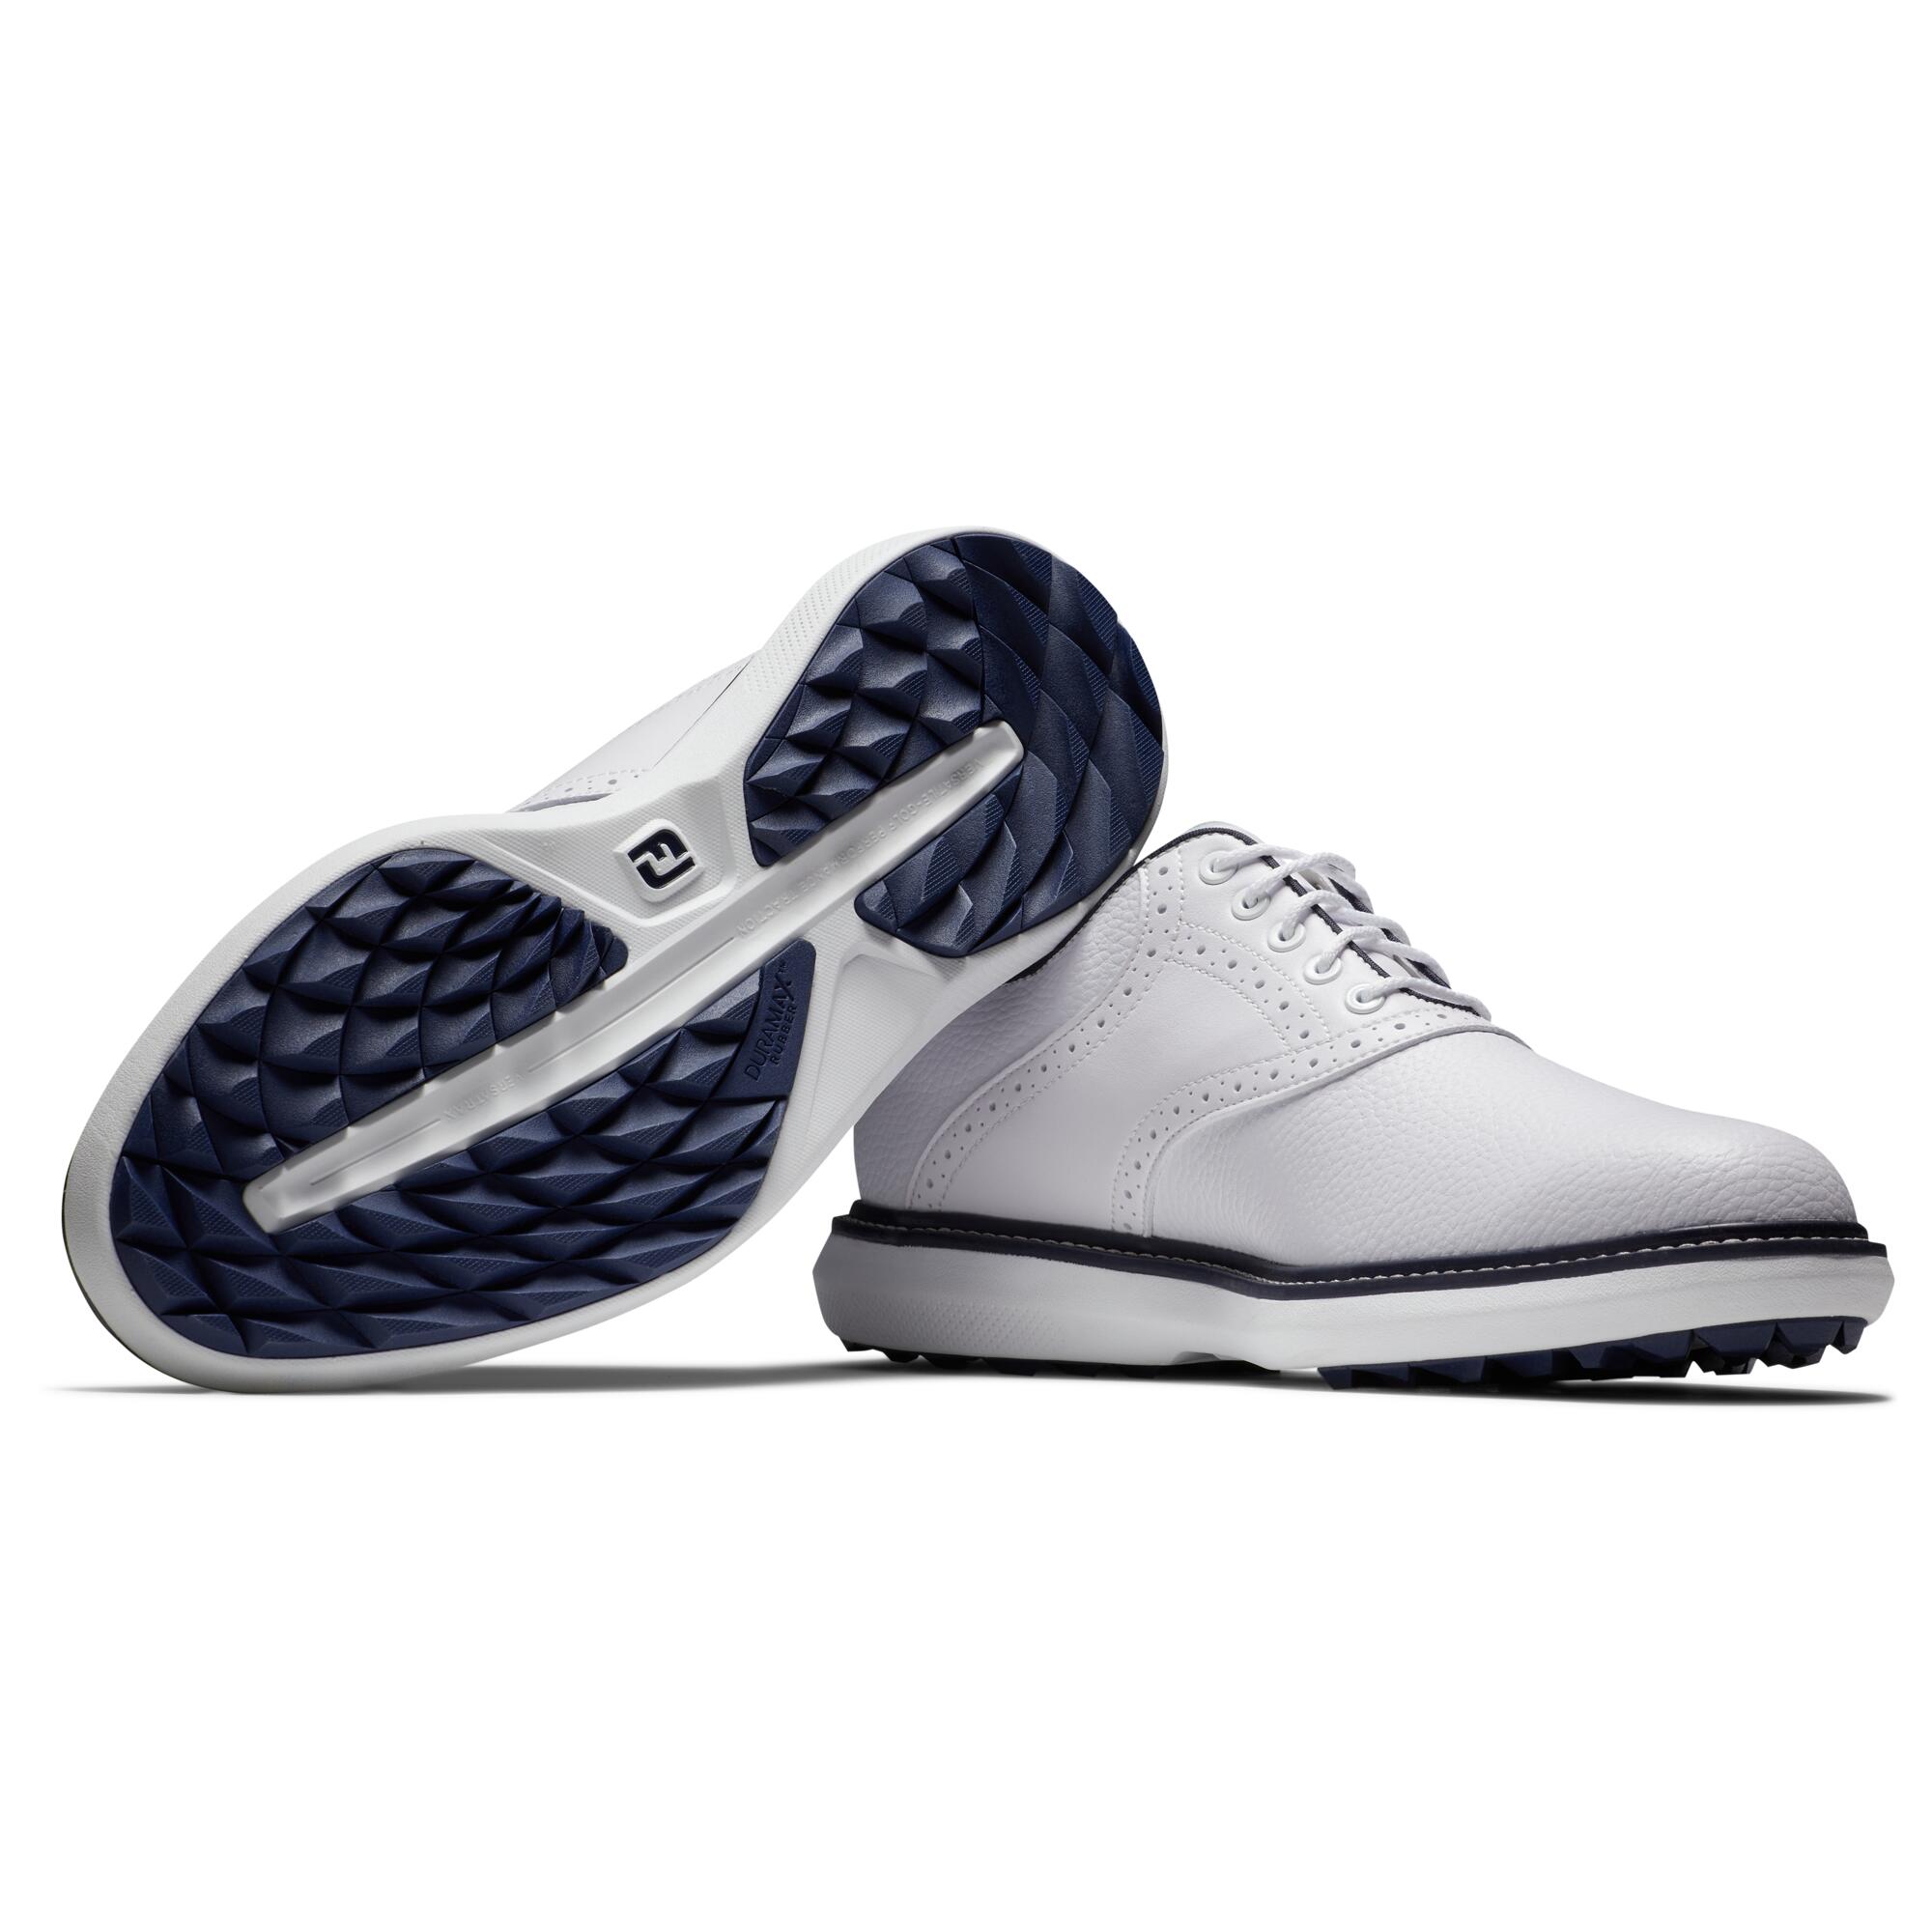 Men's golf spikeless shoes Footjoy - Traditions white 5/6